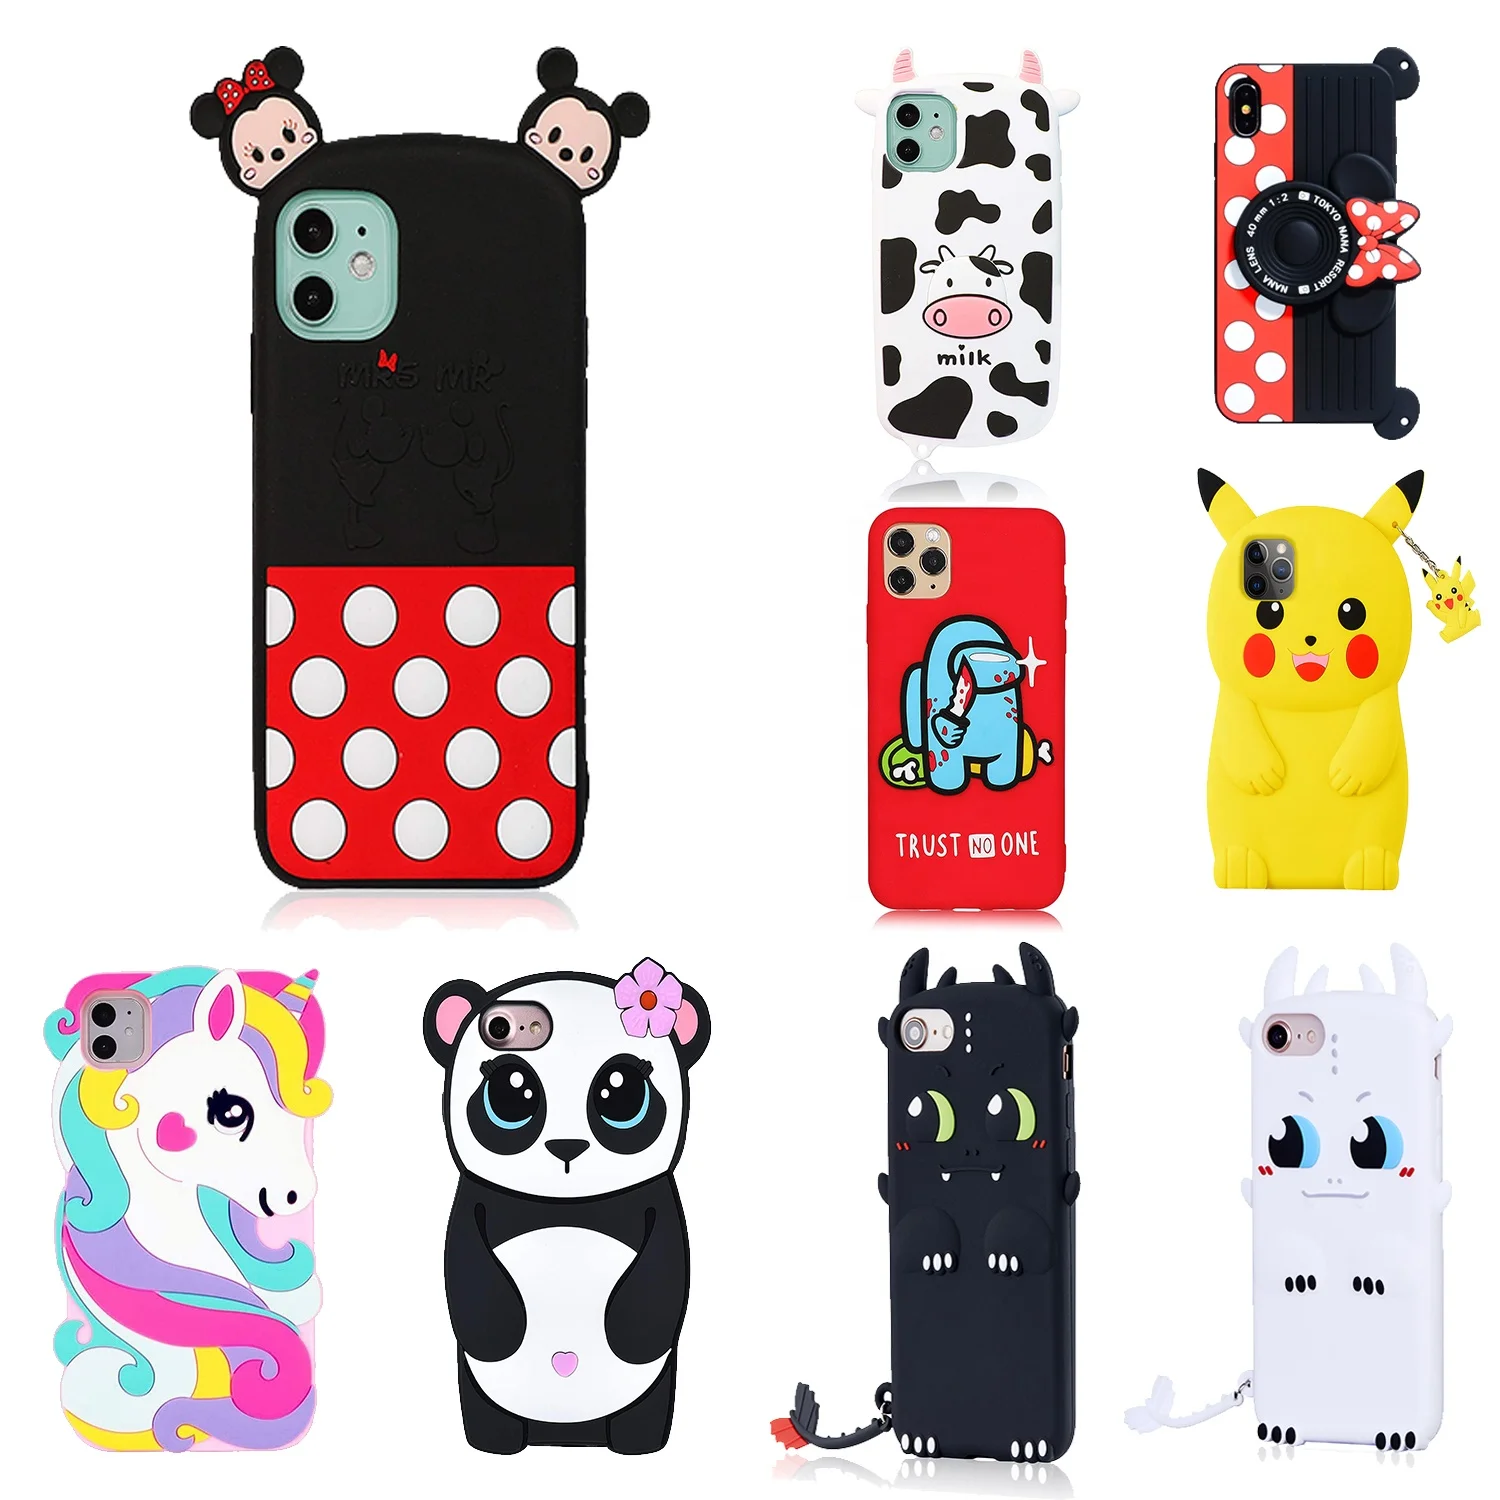 

Newest Custom Silicone Cover Cell Phone Case For Iphone 12 11 X XR Xsmax 6 6Plus 7 8, Multiple colors